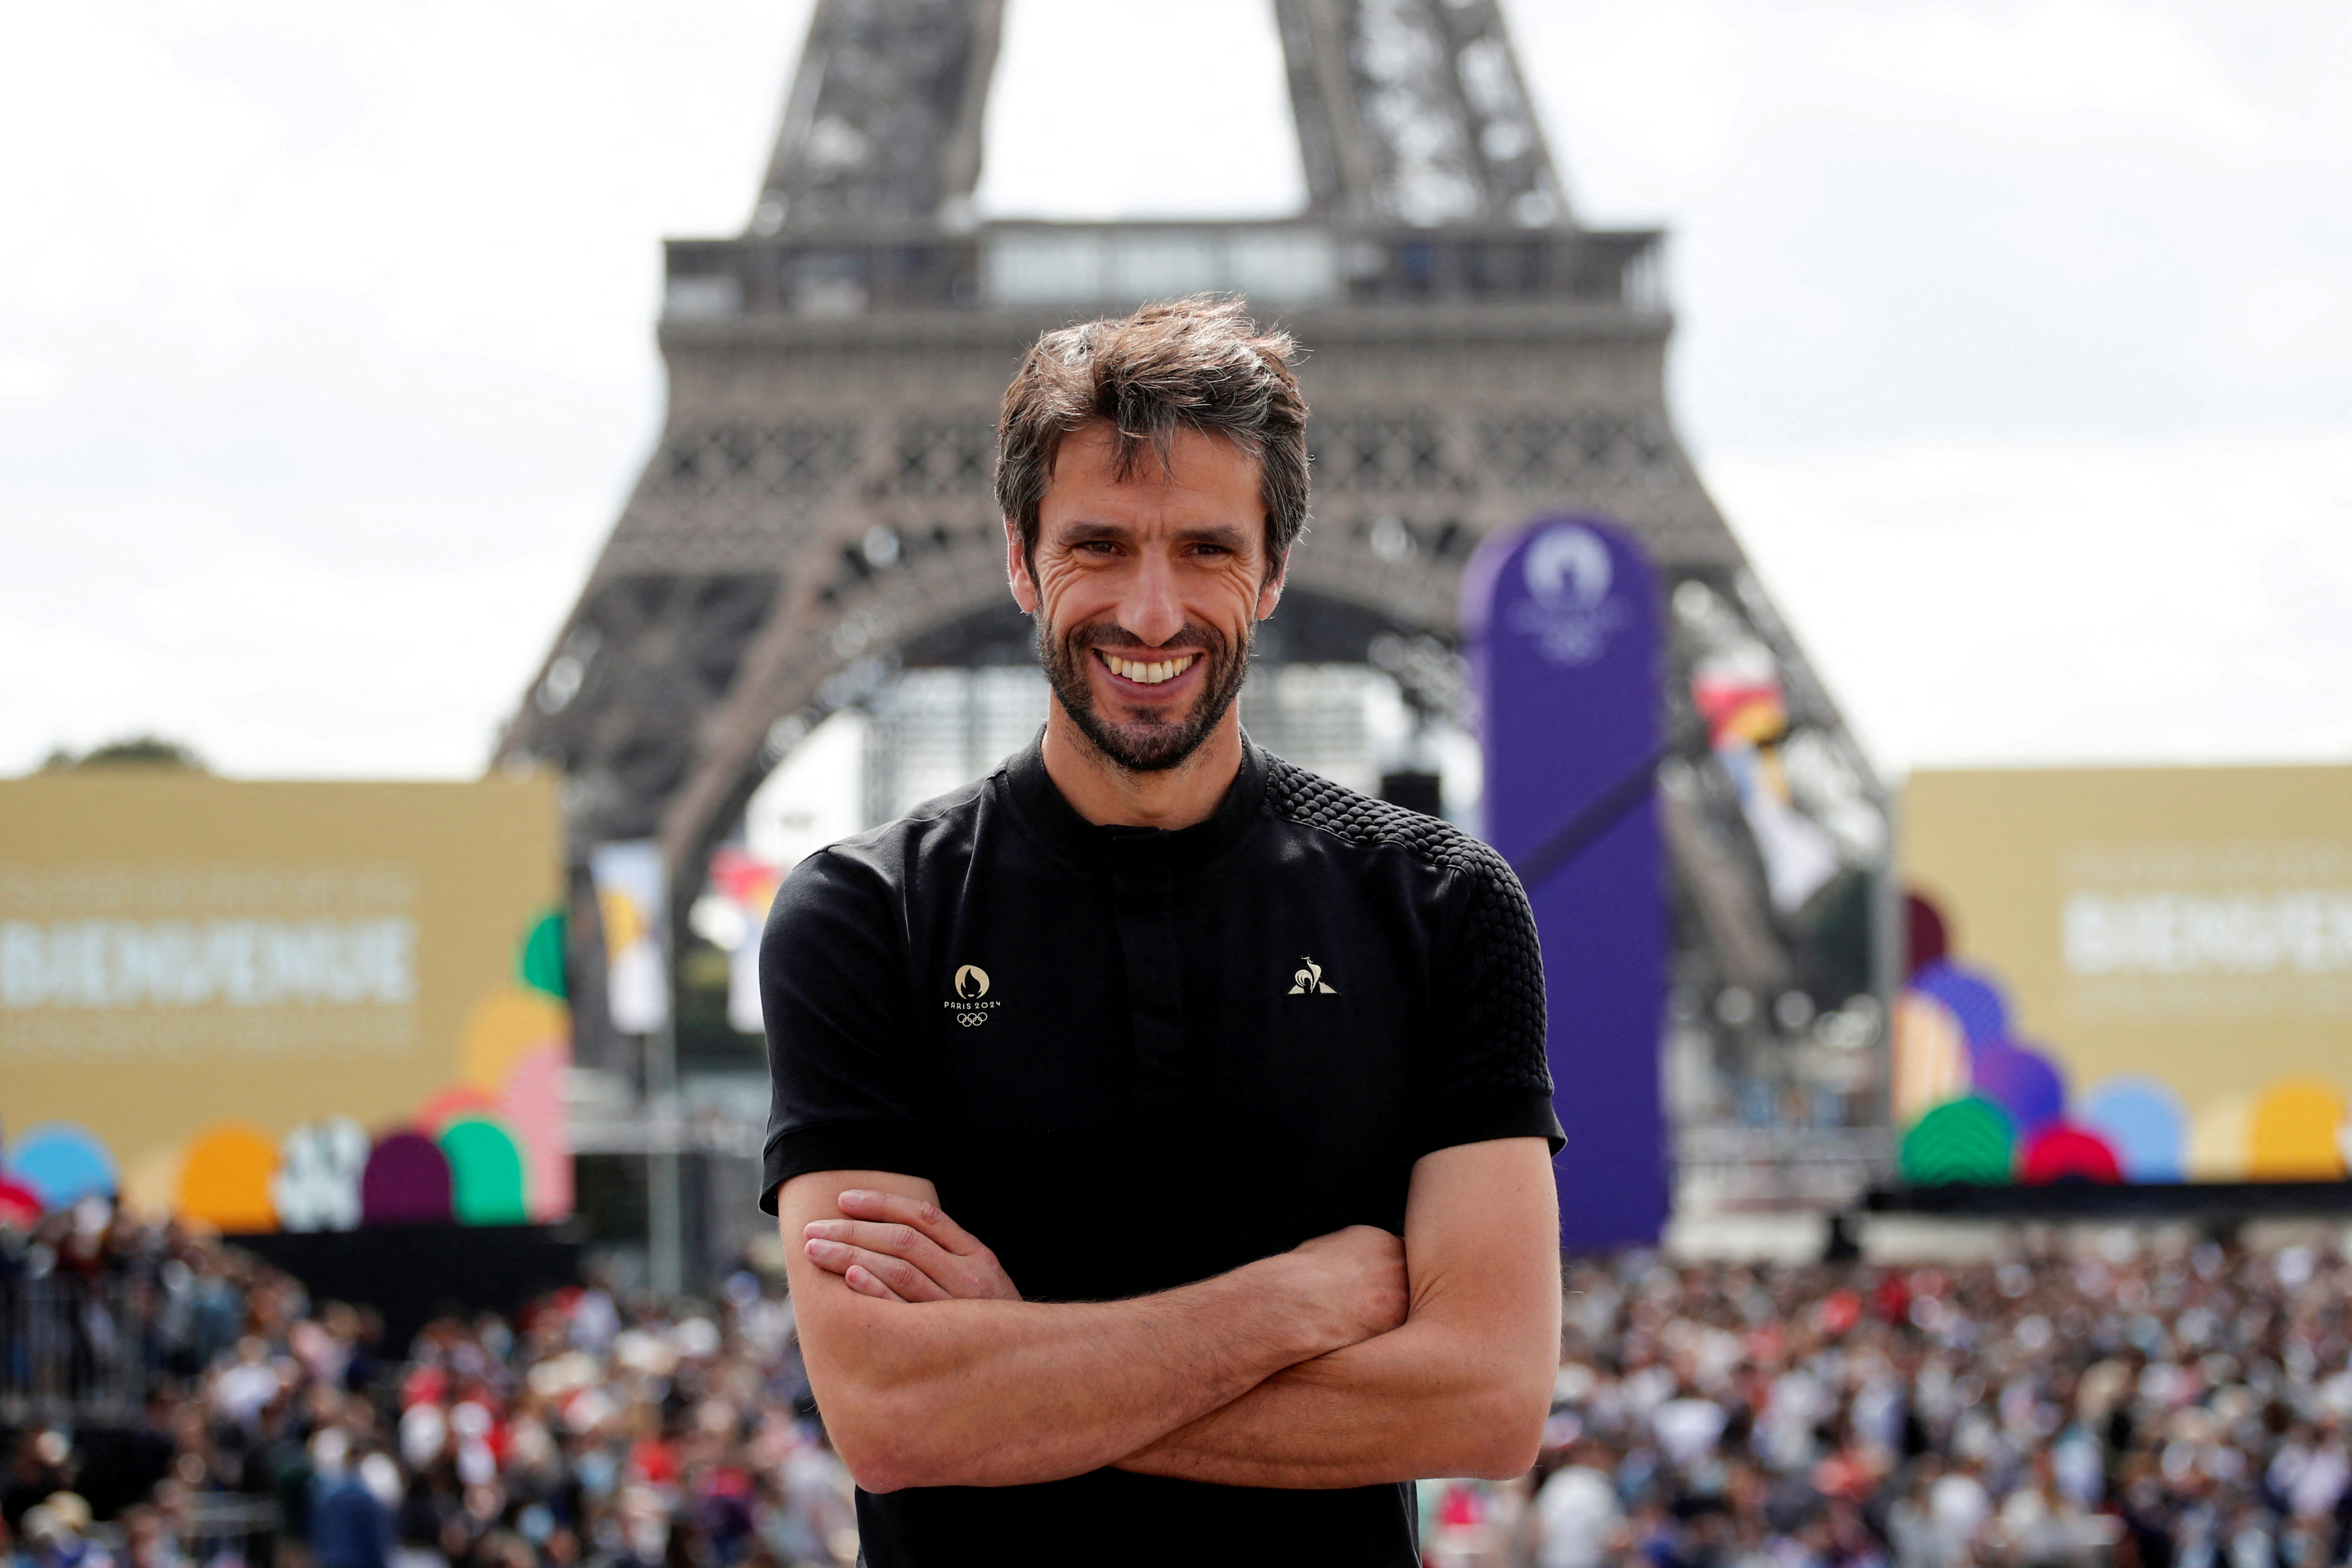 FILE PHOTO: Paris 2024 Olympics Organising Committee President Tony Estanguet poses in front of the Eiffel Tower as people gather at Paris' Olympics fan zone to watch the closing ceremony of the Tokyo games, at Trocadero Gardens in Paris, France, August 8, 2021. REUTERS/Benoit Tessier/File Photo